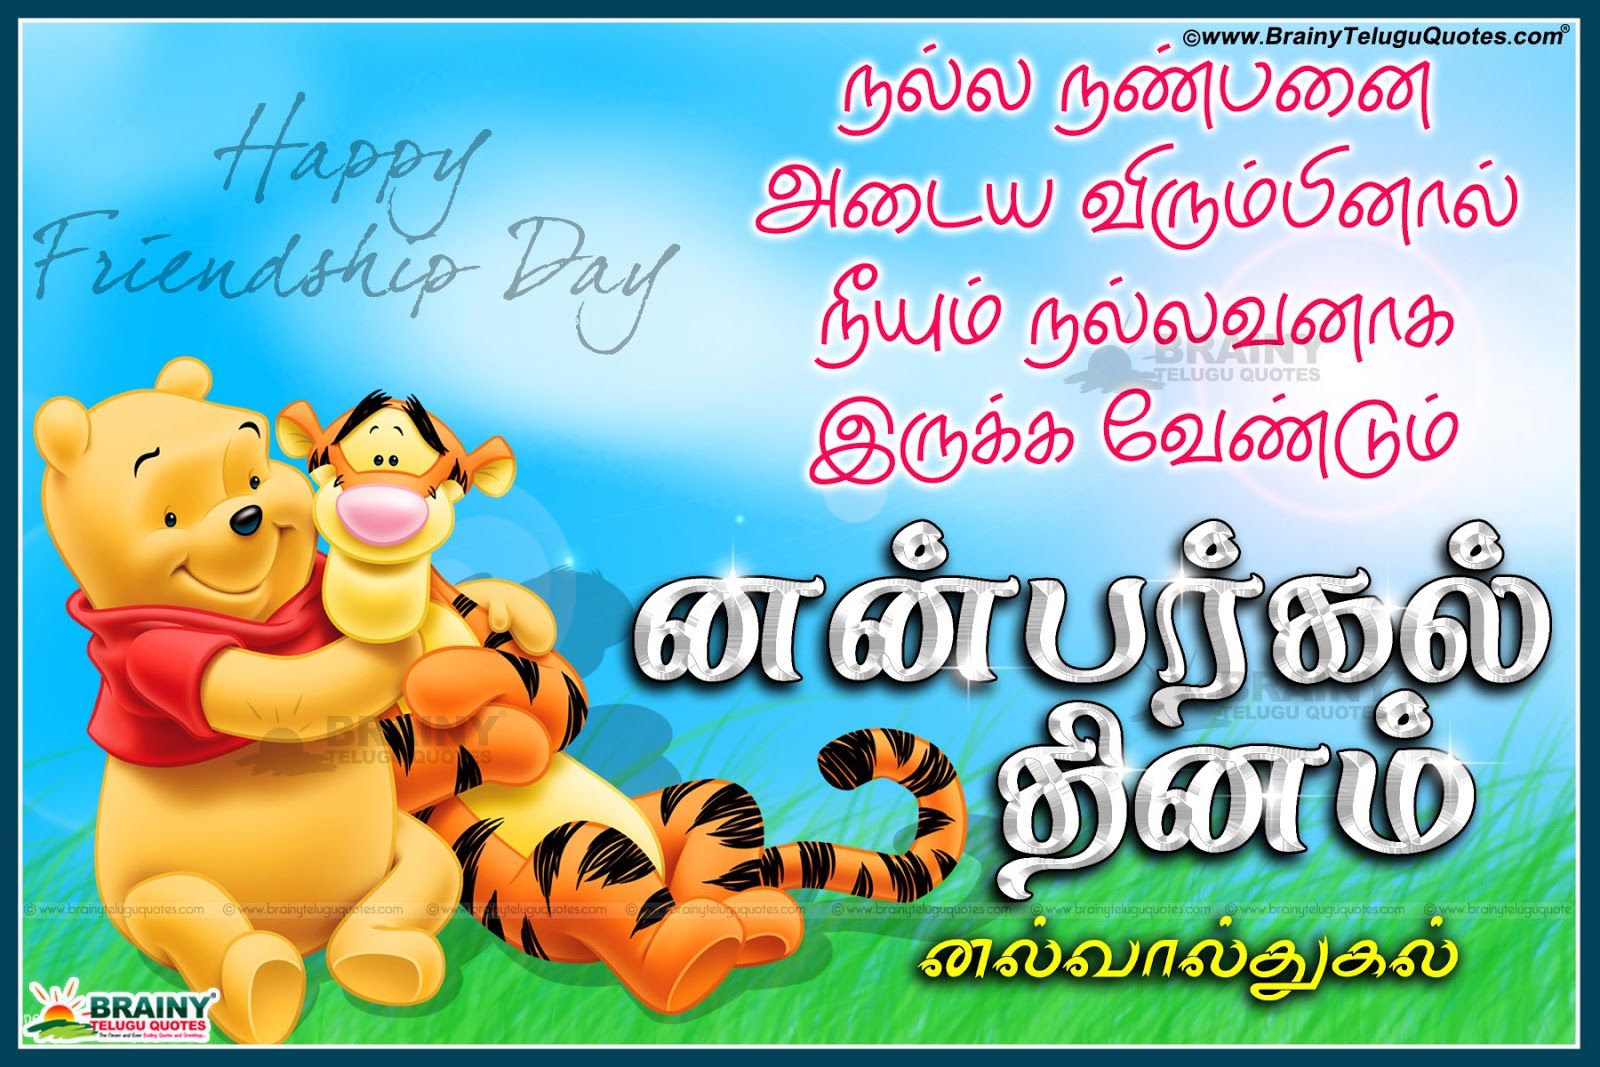 Friendship Day Latest Tamil Greetings and WhatsApp Wishes facebook